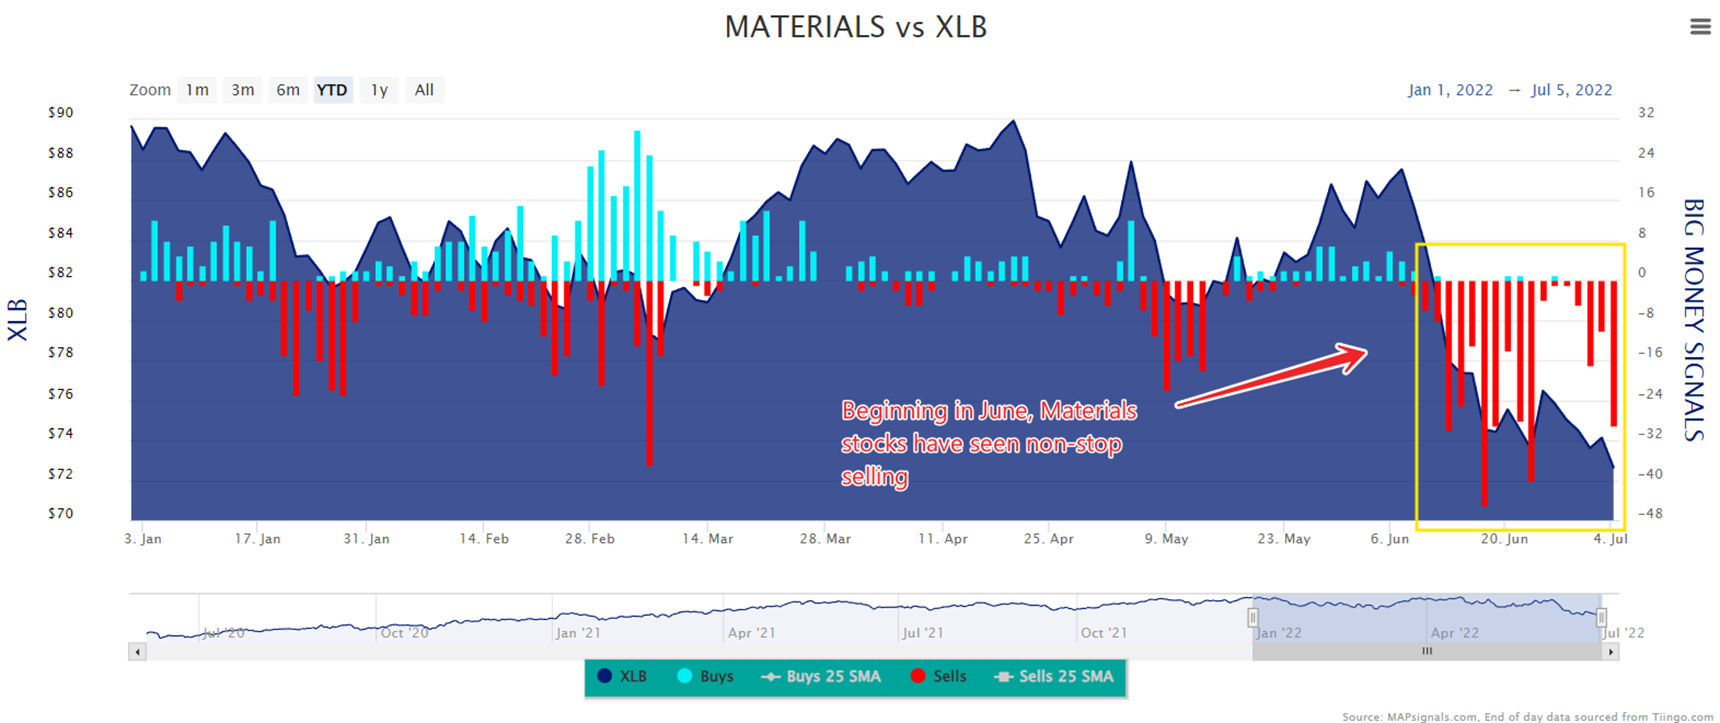 Beginning in June, Materials stocks have seen non-stop selling | Materials vs XLB